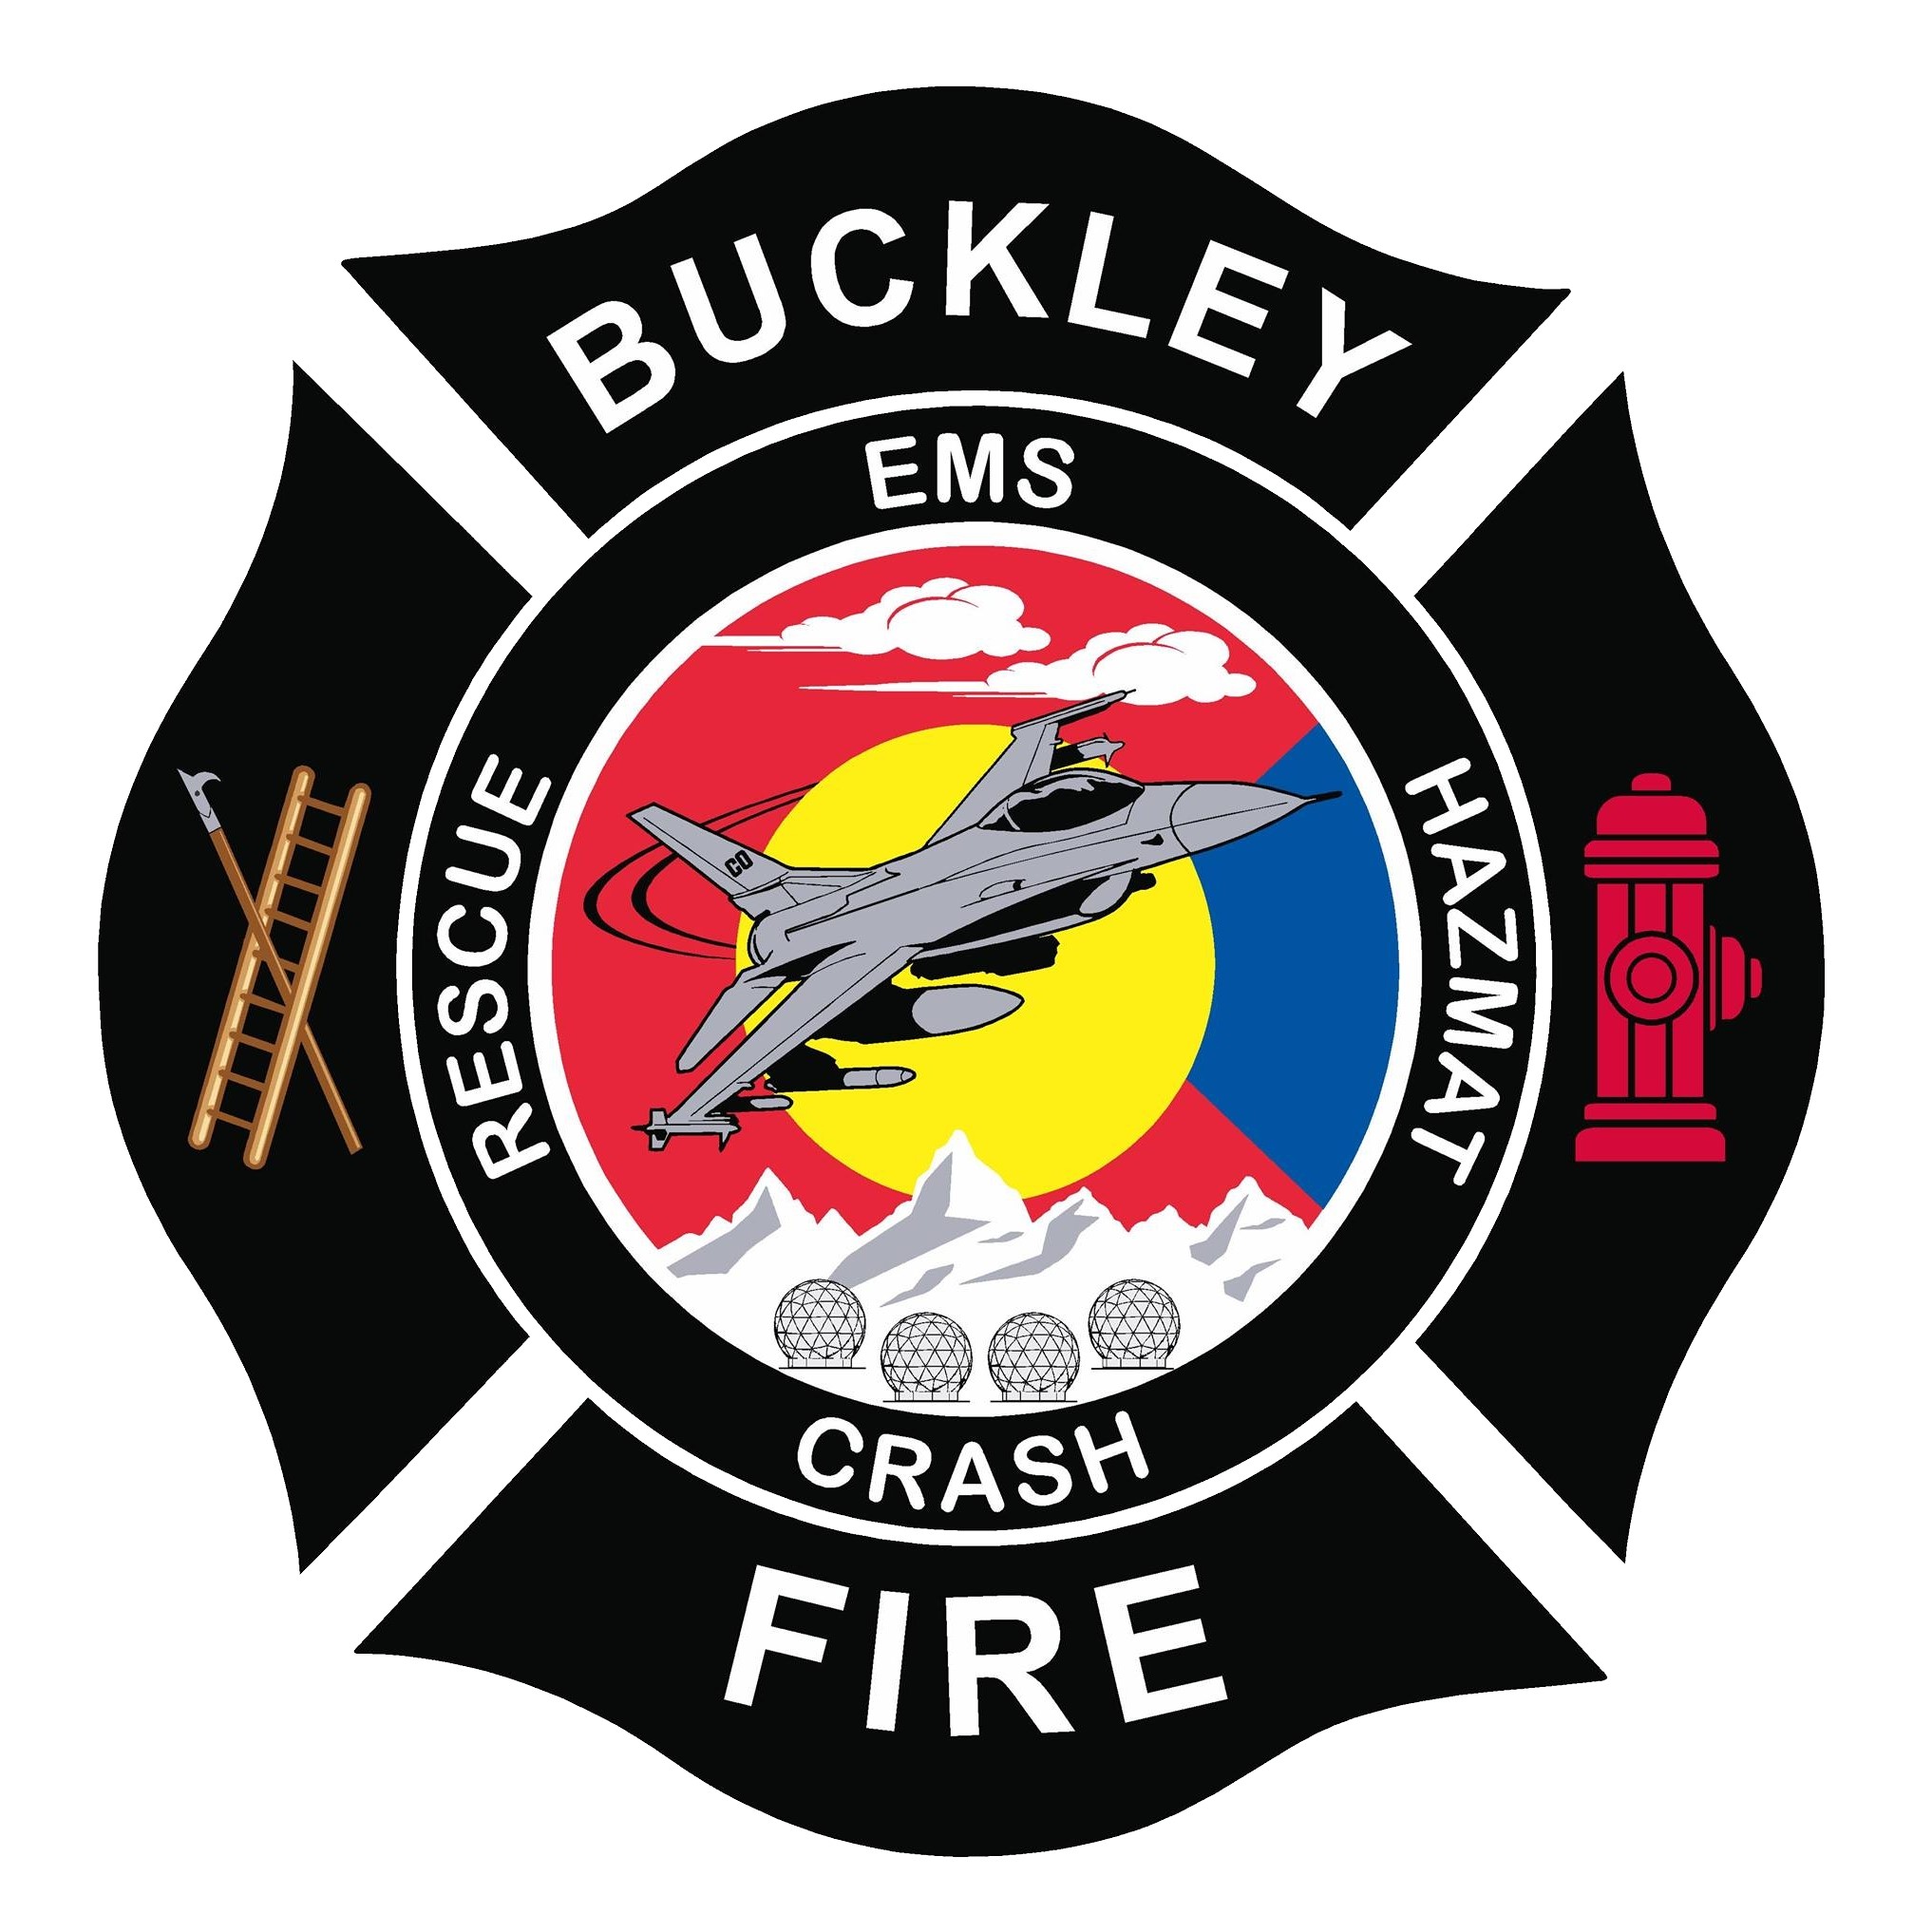 Buckley Air Force Fire